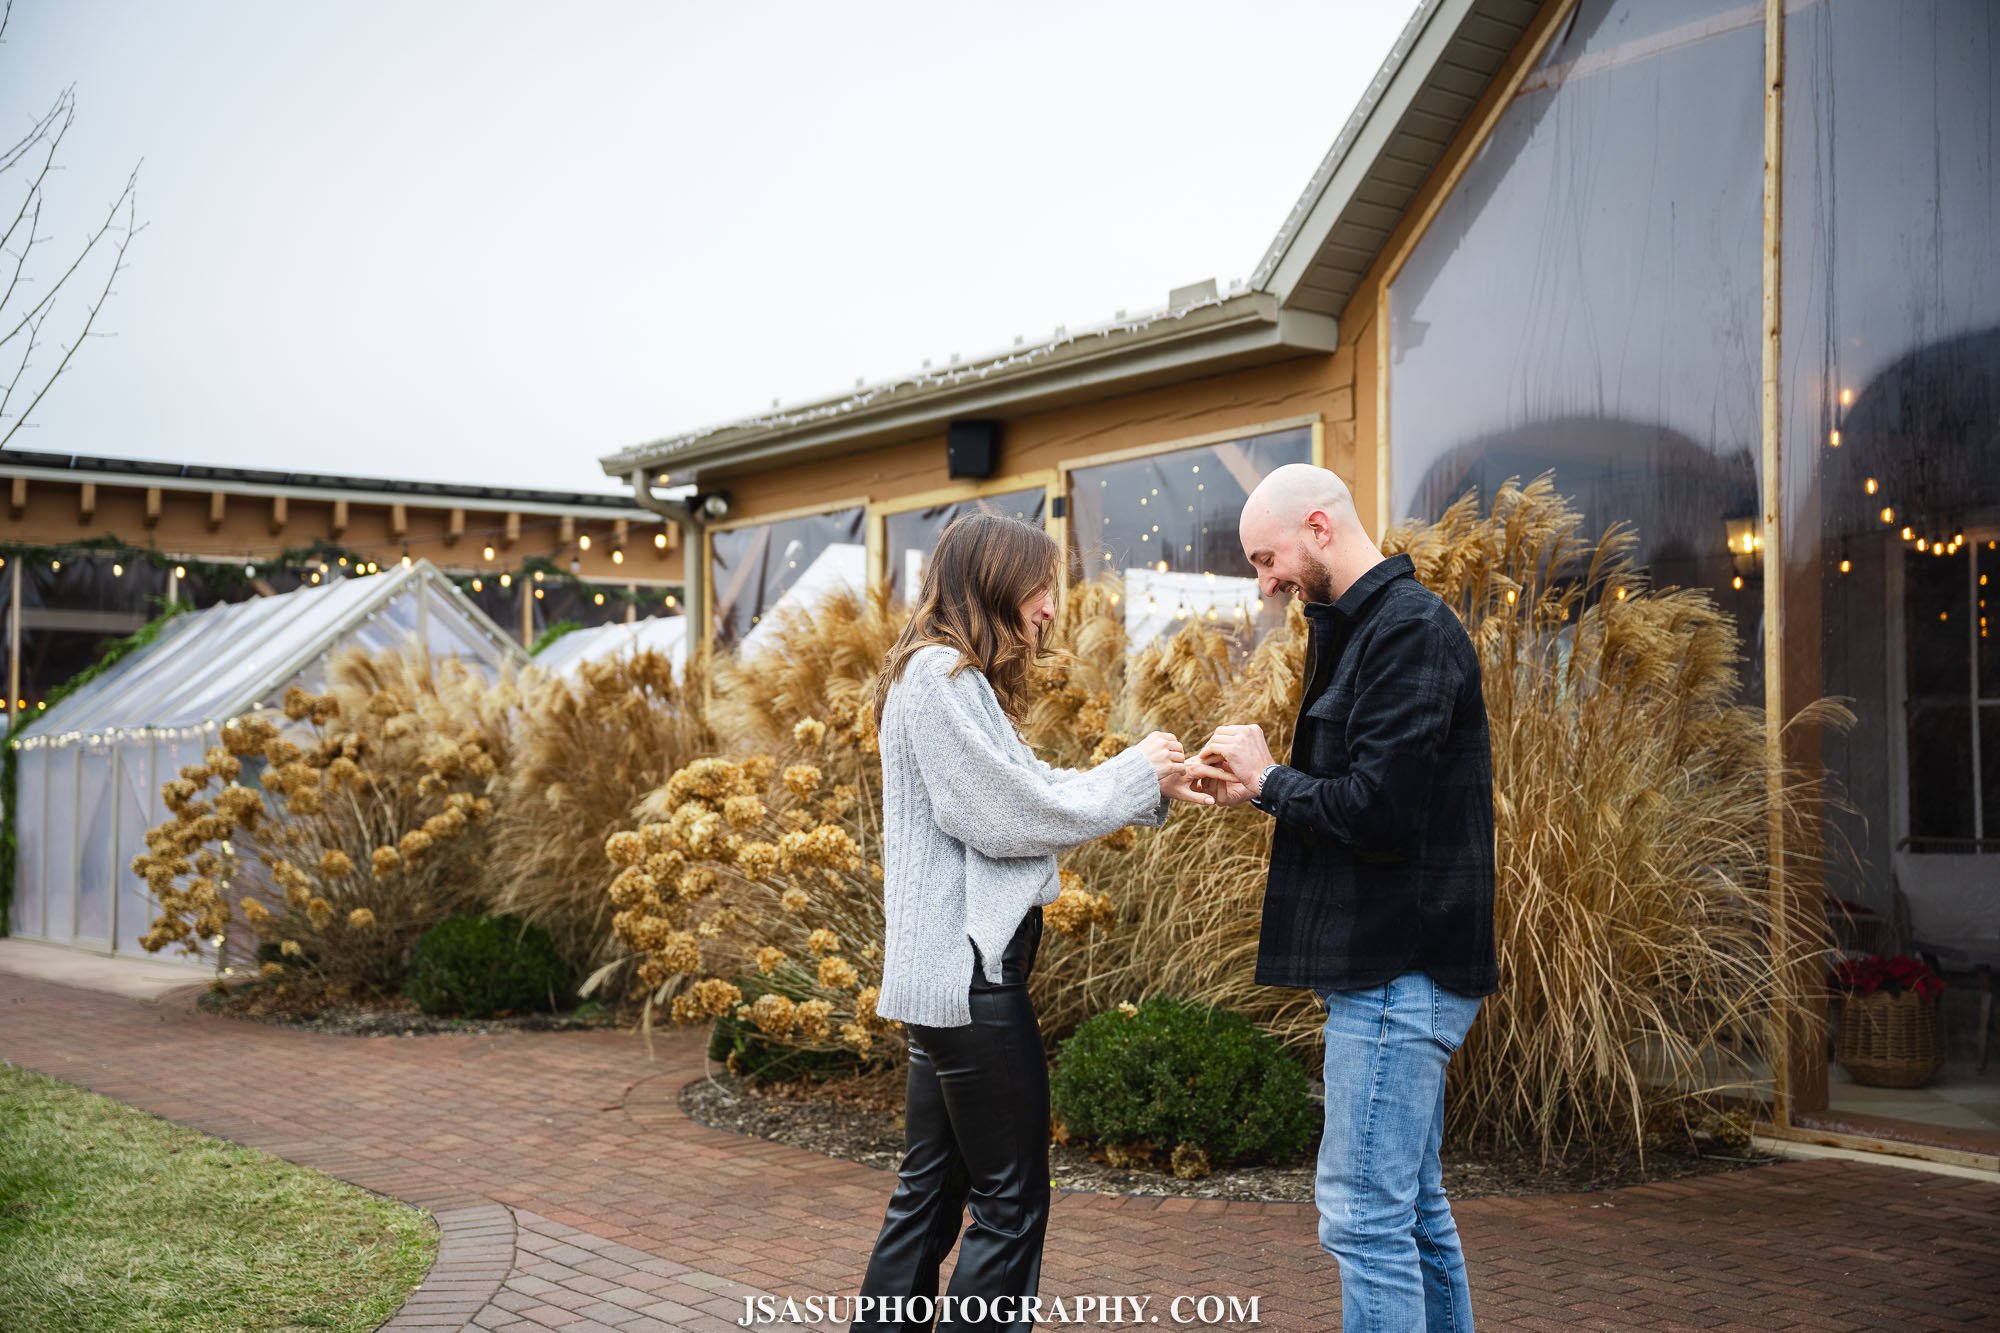 drew-alex-surprise-proposal-photos-old-westminister-winery-jsasuphotography-7.jpg